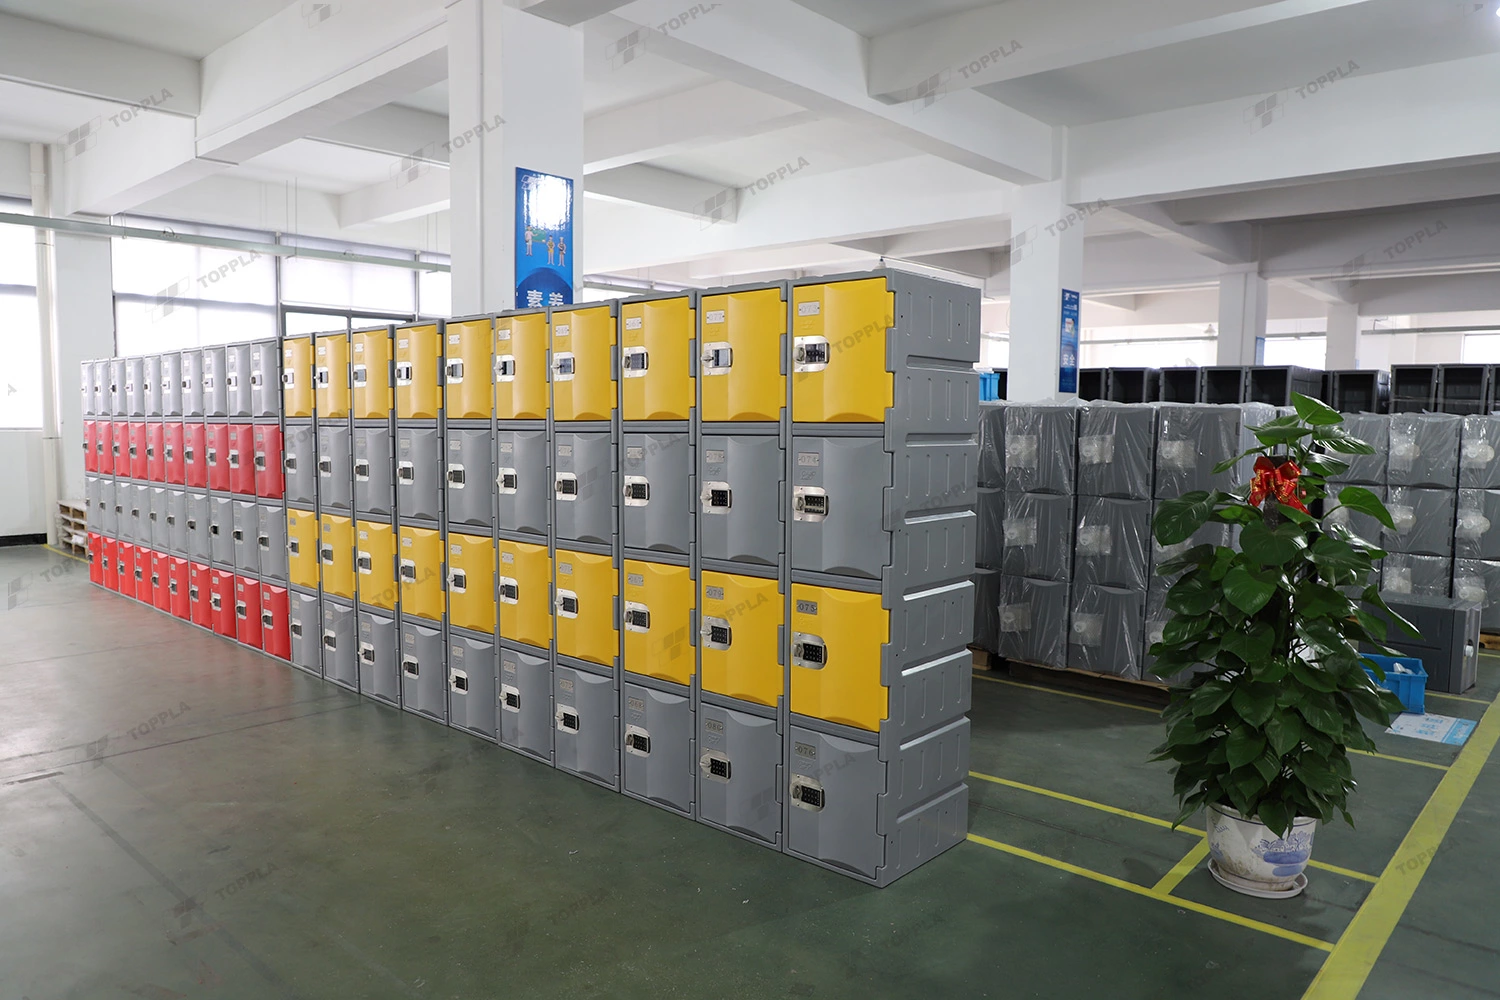 Shipping news: TOPPLA ABS HDPE Plastic Heavy Duty Lockers Export to Europe